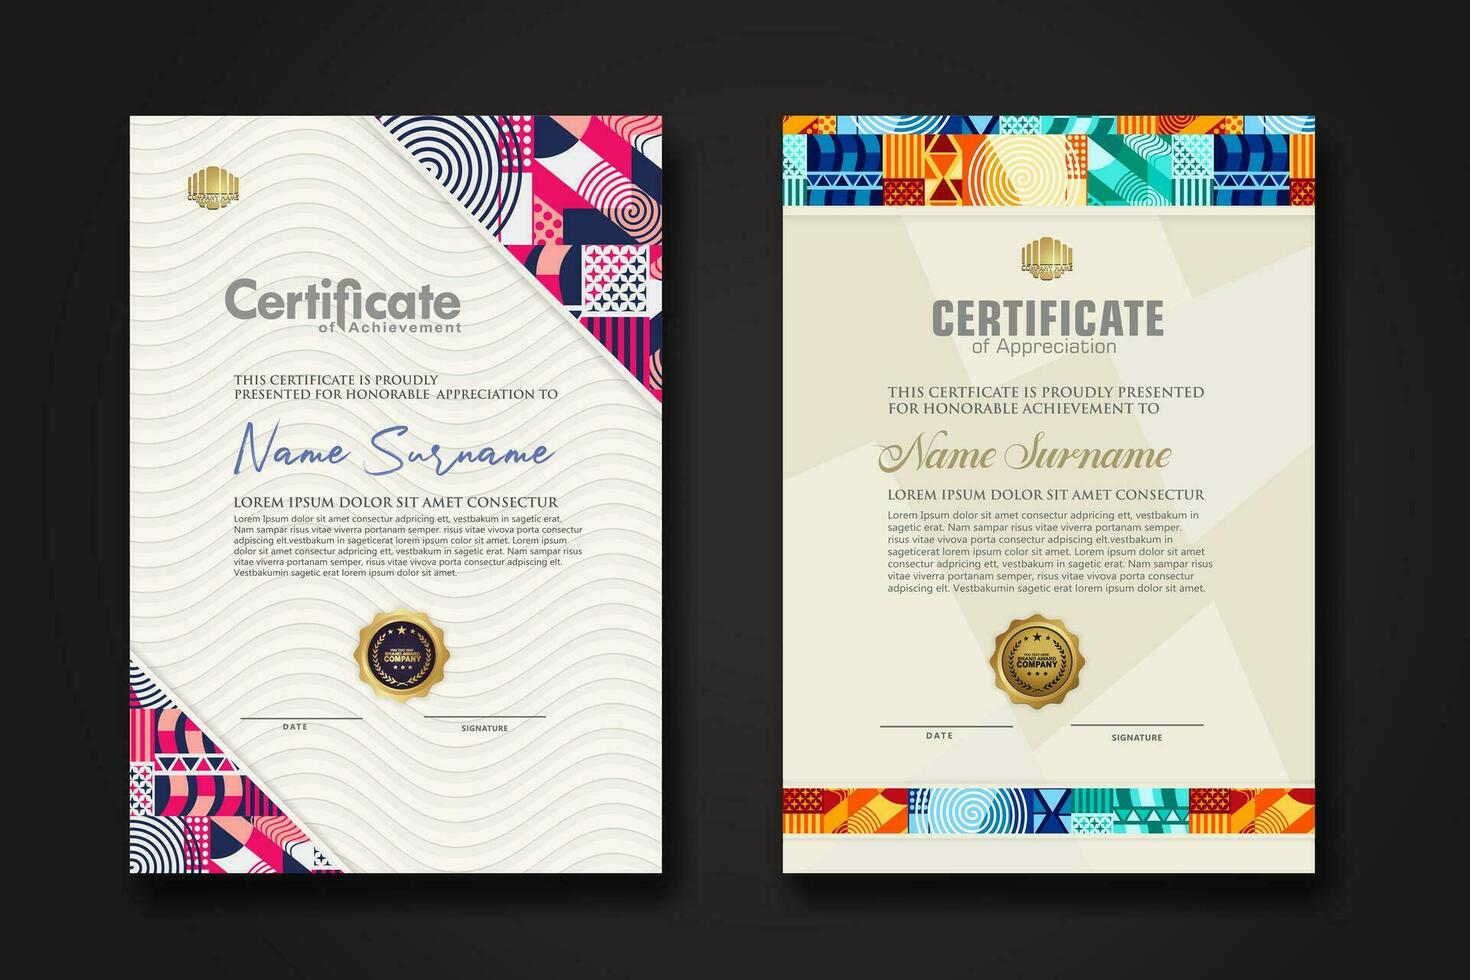 Certificate template with geometric artwork design and simple shapes.vector Illustration vector